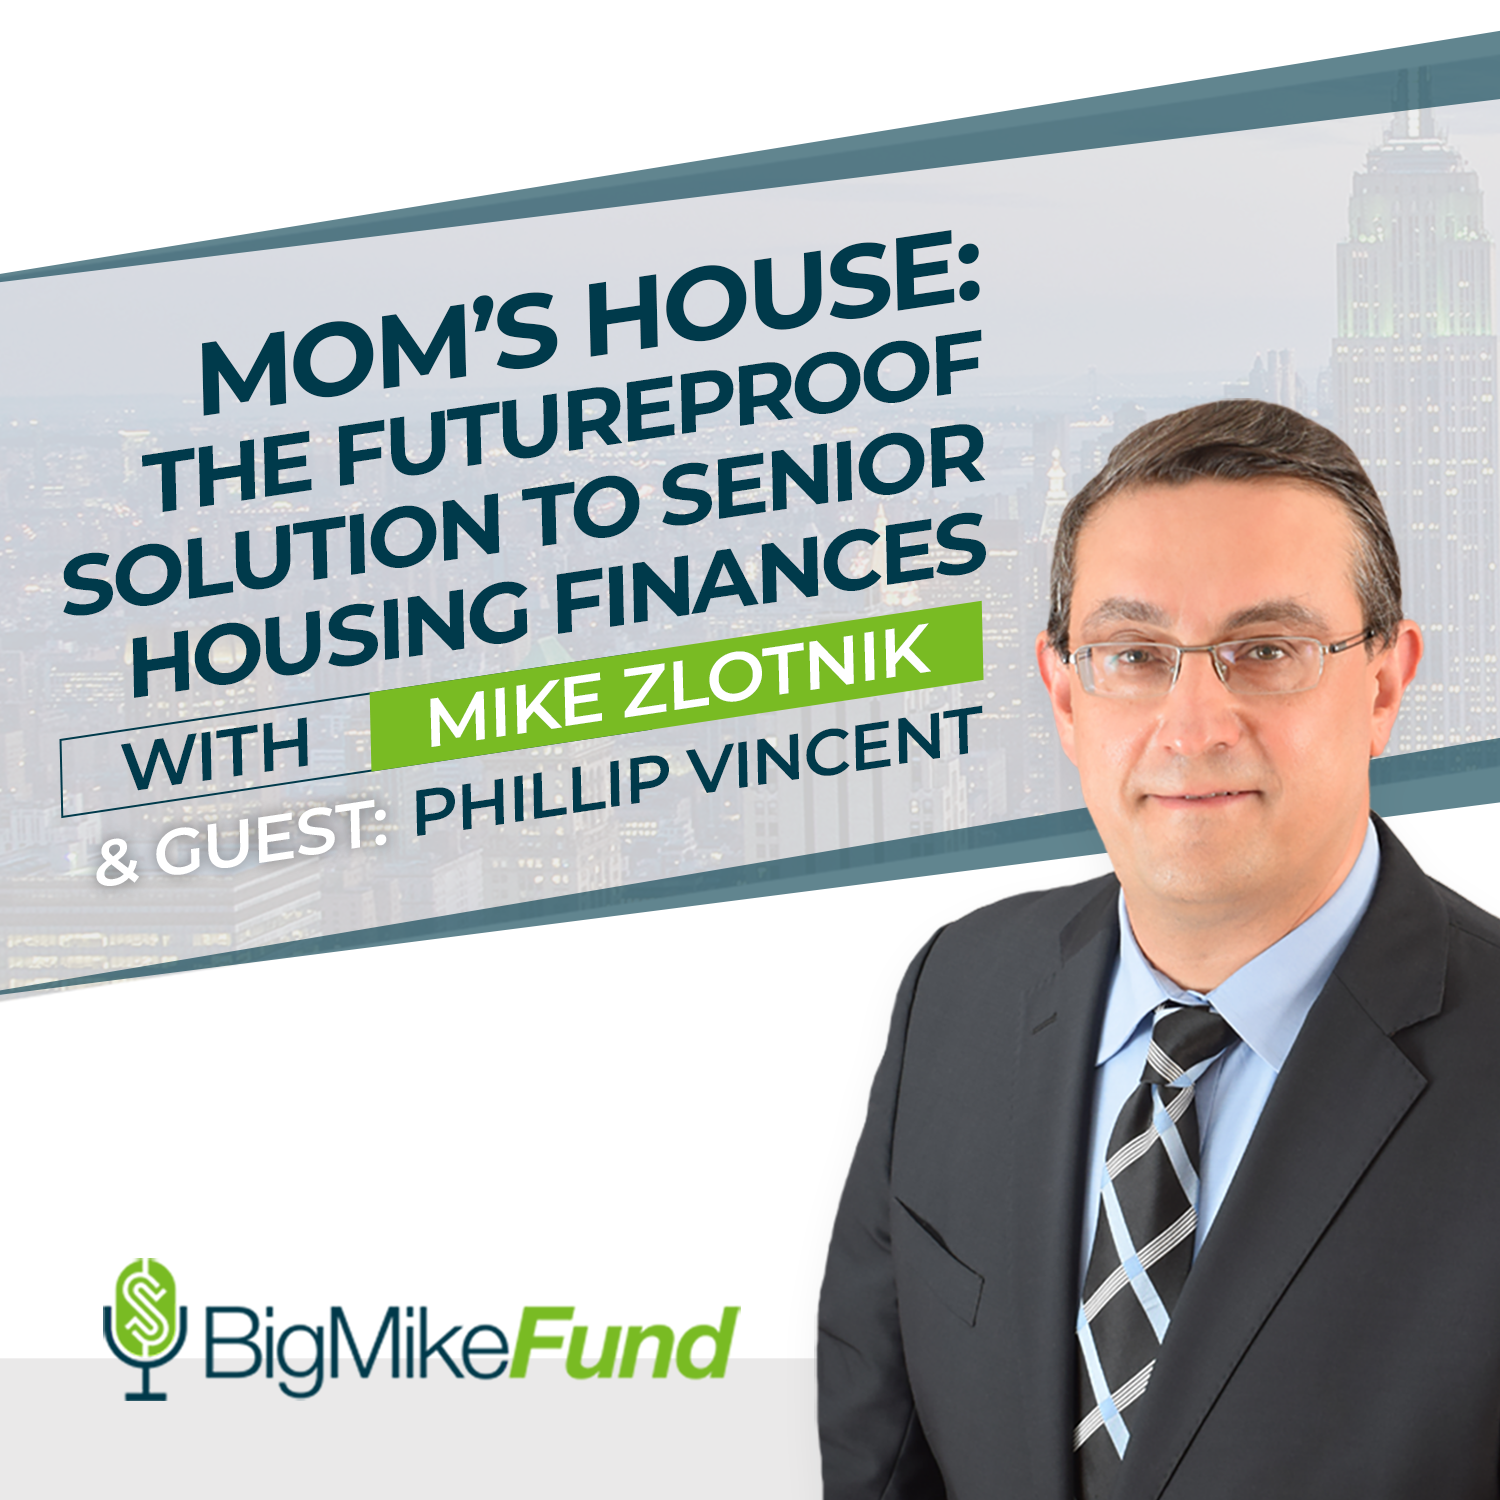 107: Mom’s House: The Futureproof Solution to Senior Housing Finances with Phillip Vincent